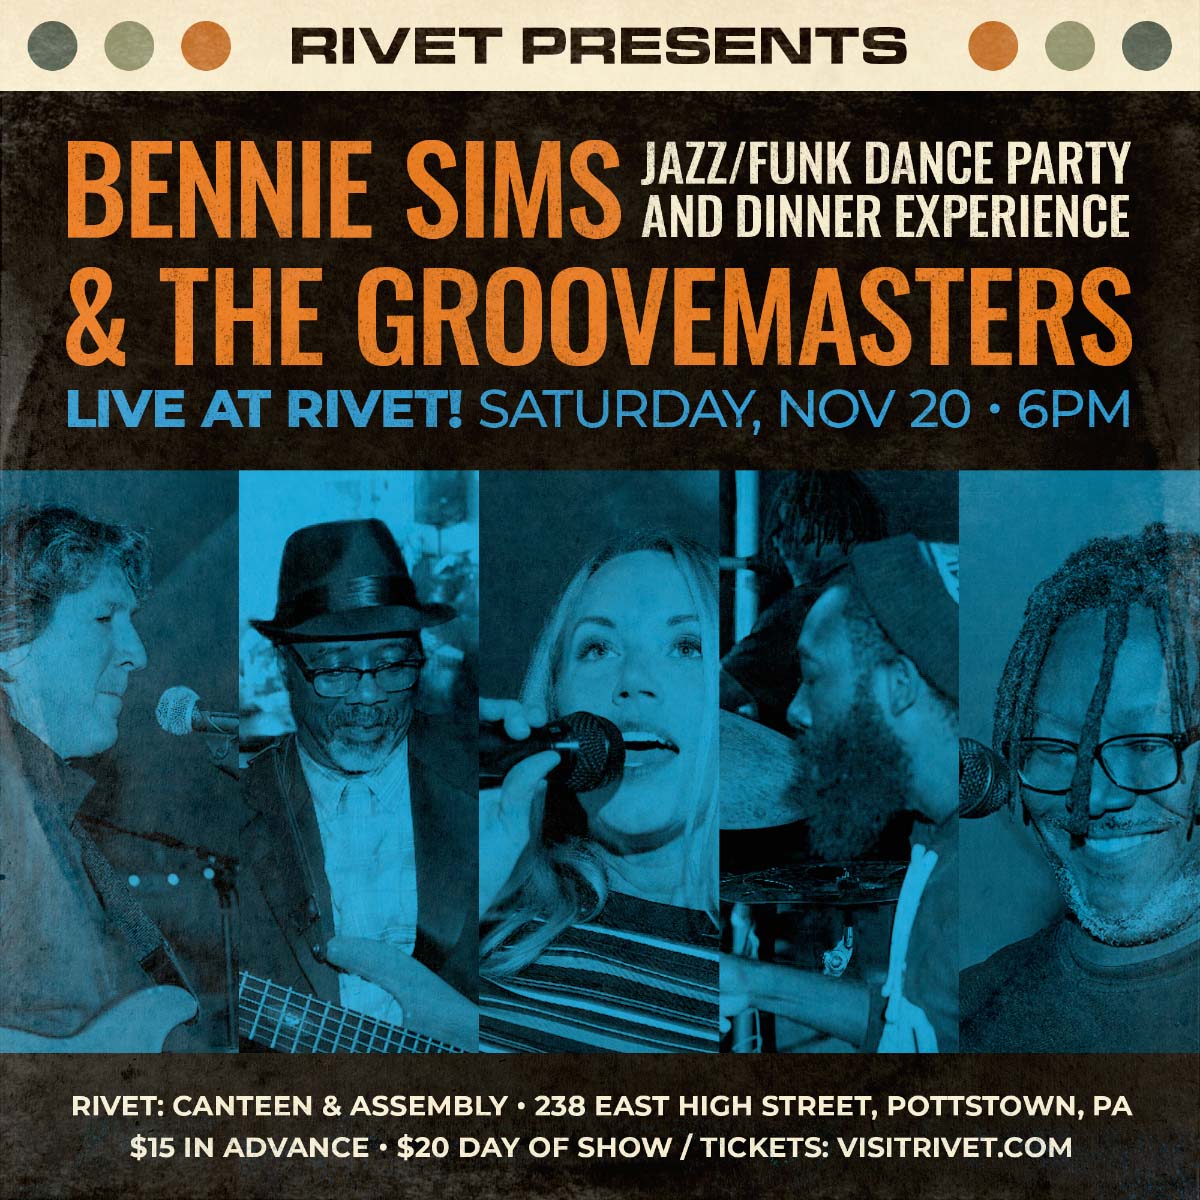 Join us at Rivet: Canteen & Assembly for a special evening of great food, drinks, and top notch music with Bennie Sims & The Groovemasters on Saturday, November 20th, starting at 6:00 PM. Dinner at 6:30 PM.